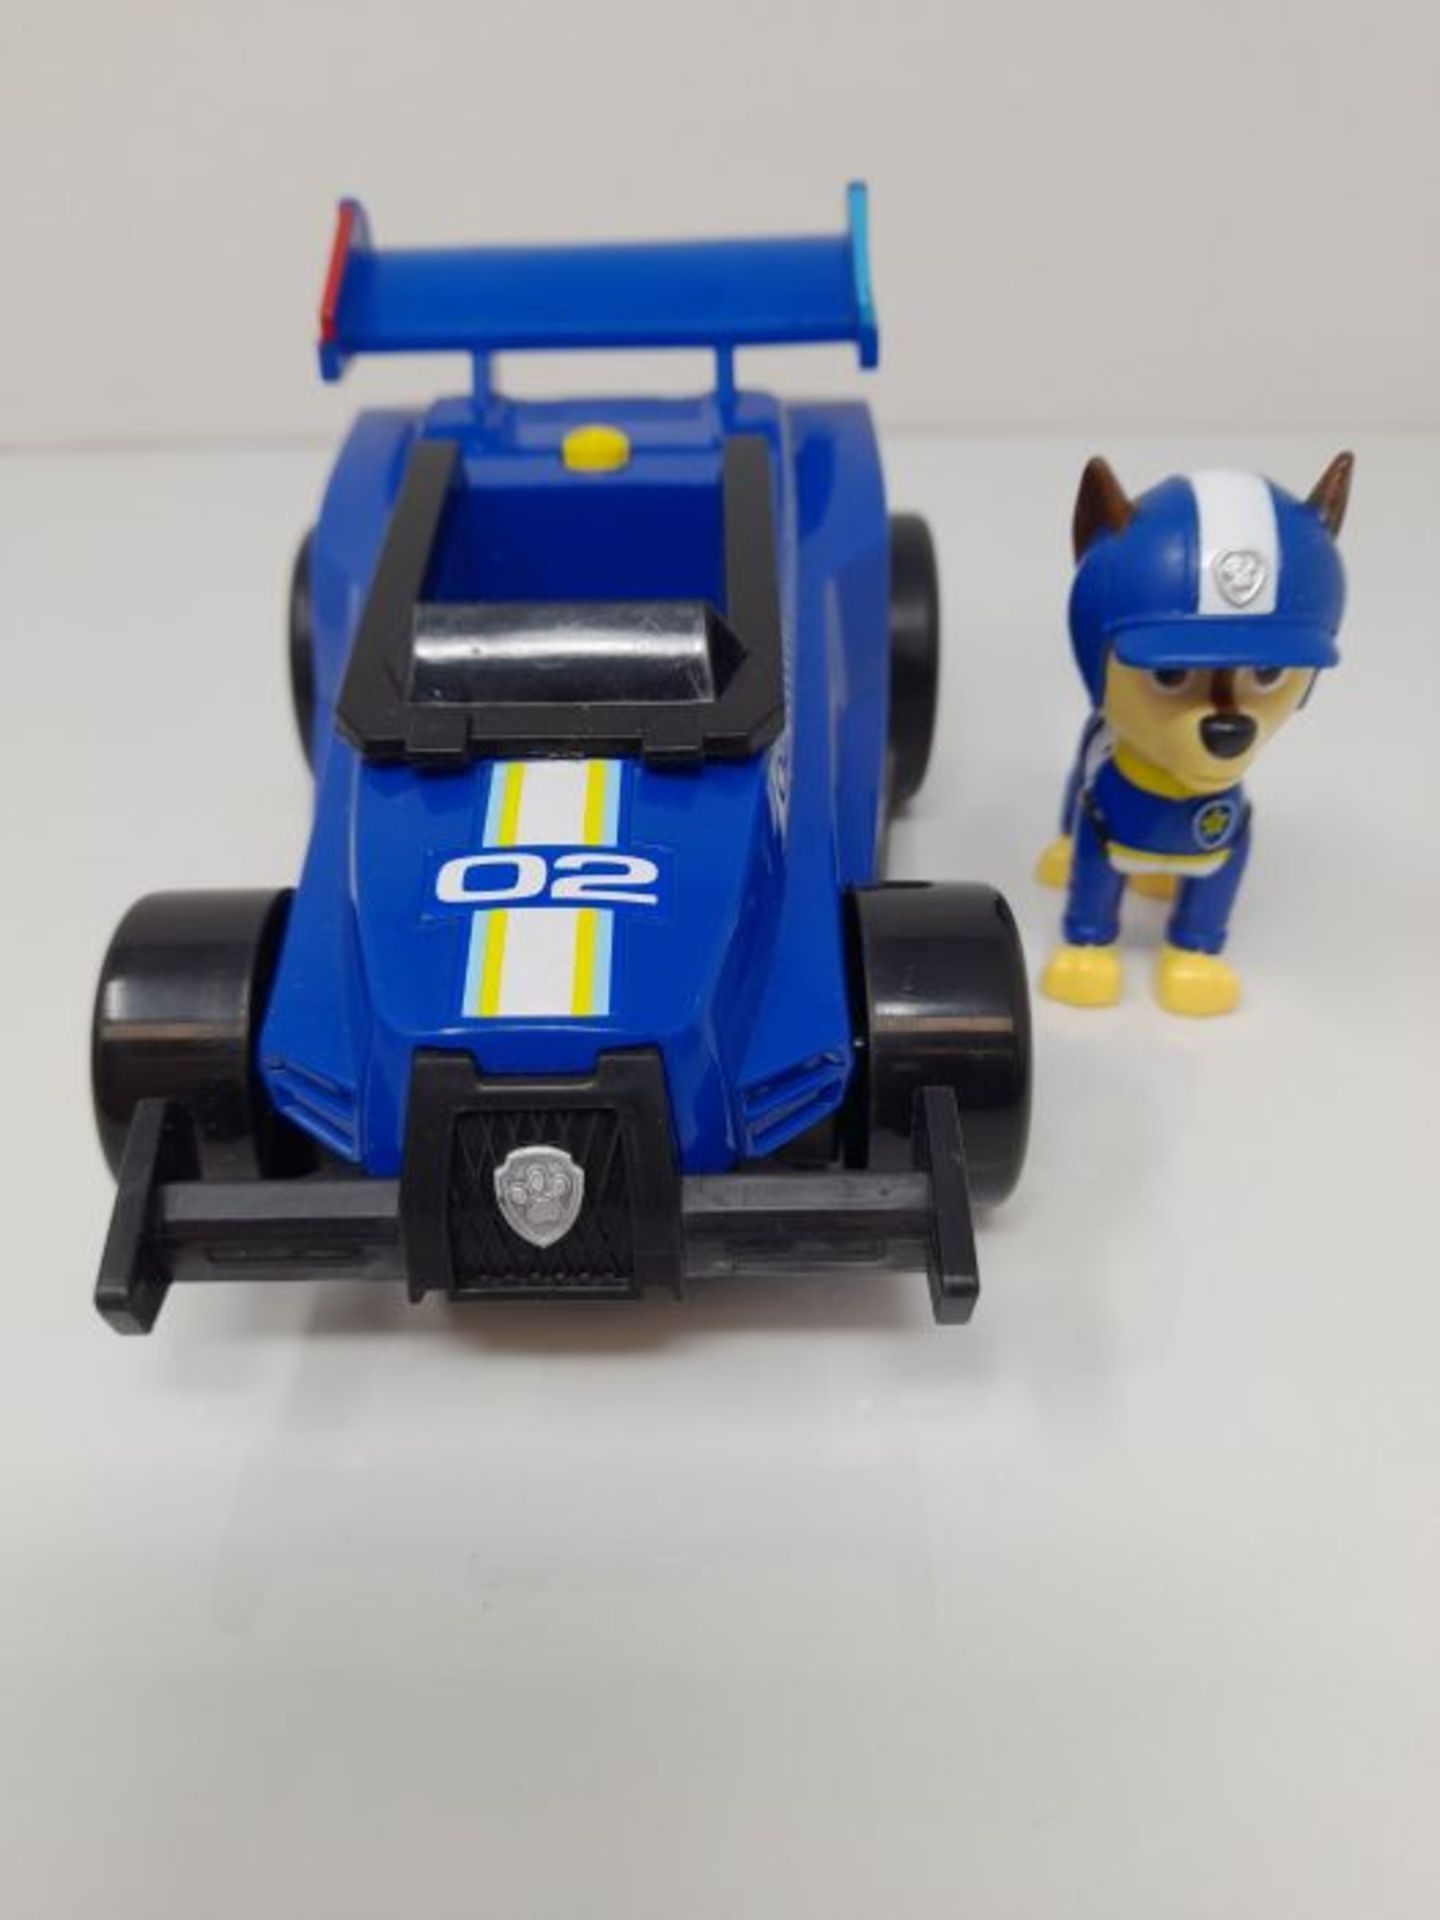 PAW Patrol Chases Race & Go Deluxe Basis Fahrzeug mit Figur (Ready, Race, Rescue), Gra - Image 3 of 3